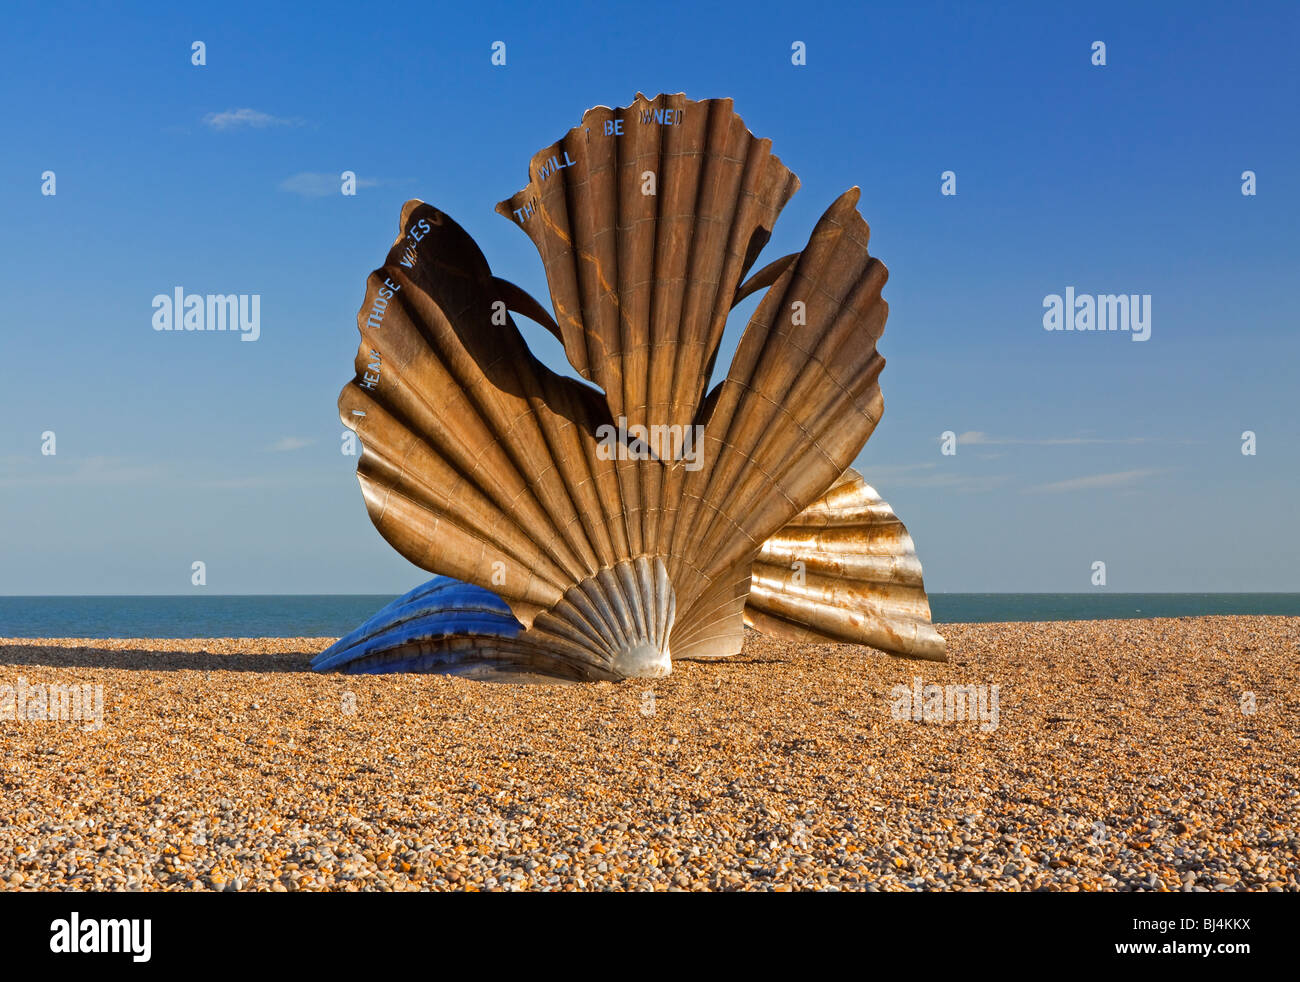 The Scallop sculpture on Aldeburgh beach Suffolk UK by Maggi Hamblin dedicated to composer Benjamin Britten and created in 2003 Stock Photo